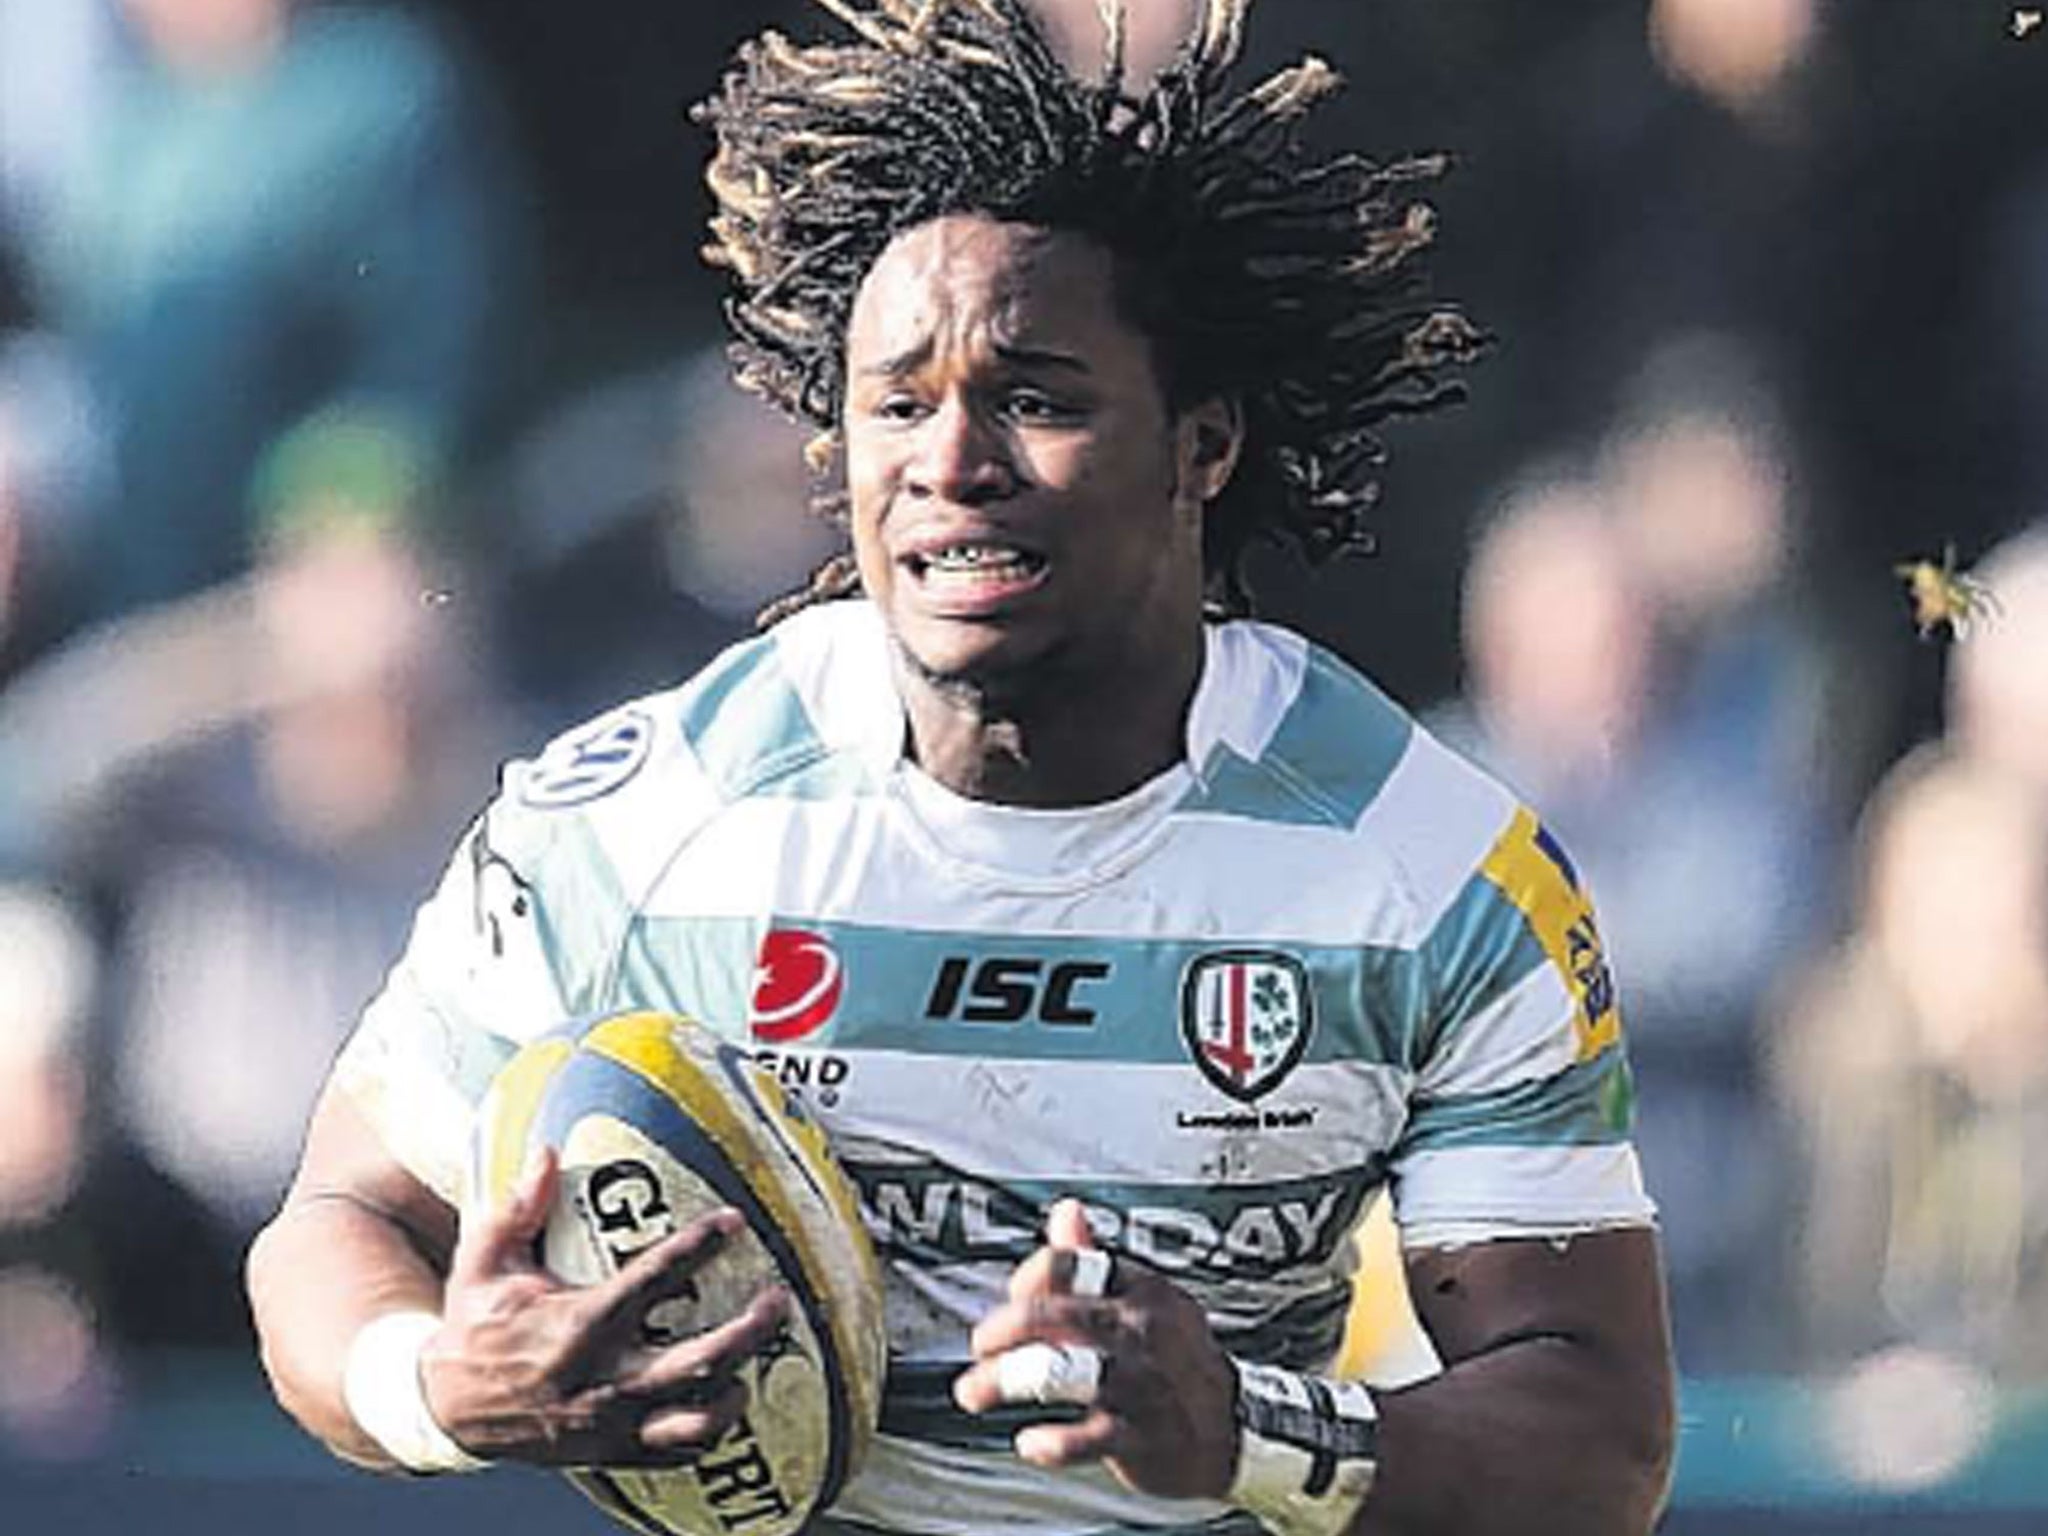 Hoop dreams: Marland Yarde gave up a promising football career at Queens Park Rangers to pursue rugby, much to the delight of his stepfather